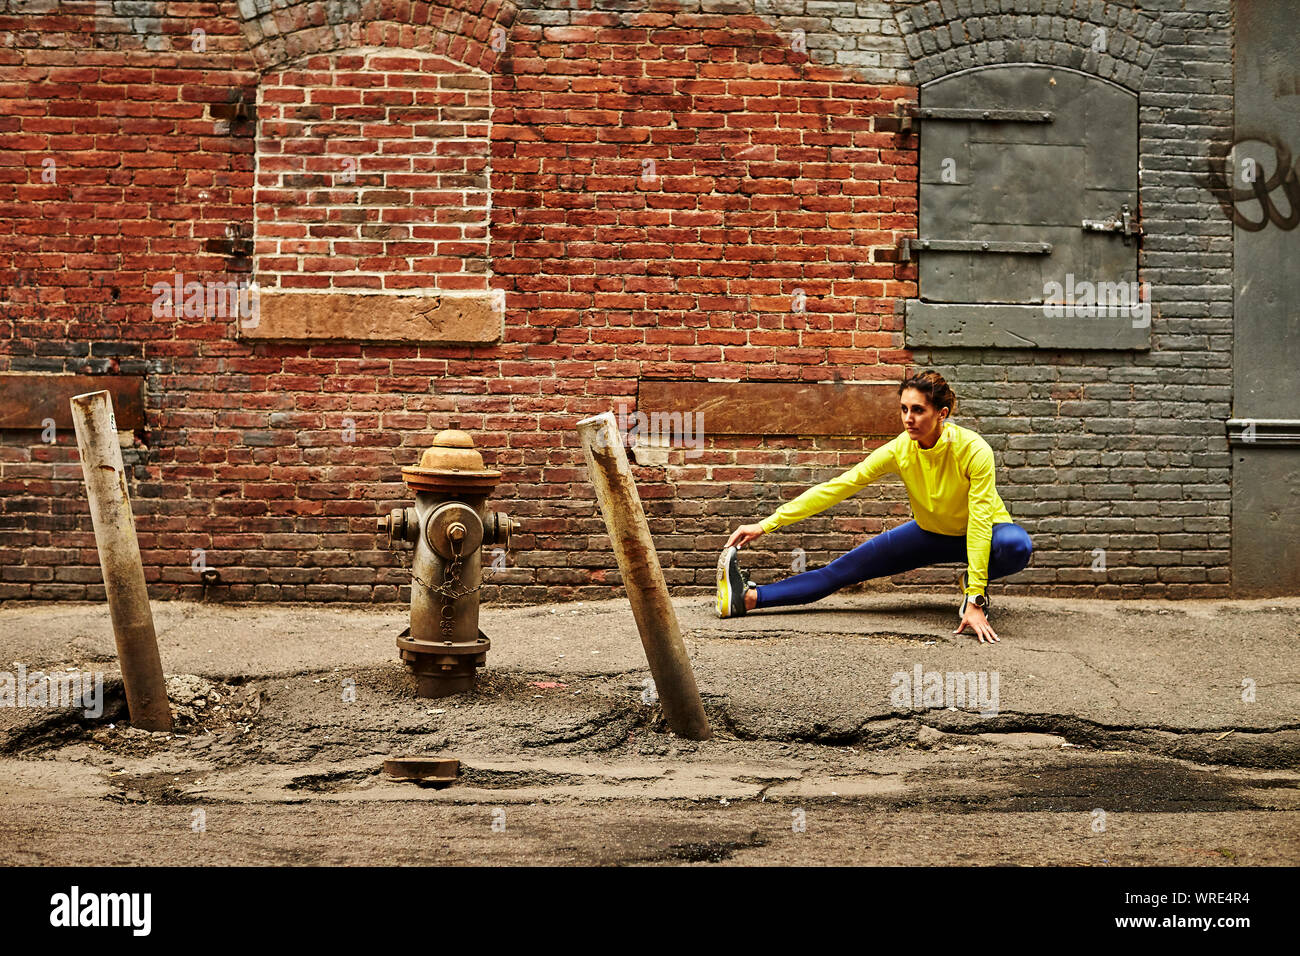 A female runner stretching on a gritty urban street. Stock Photo